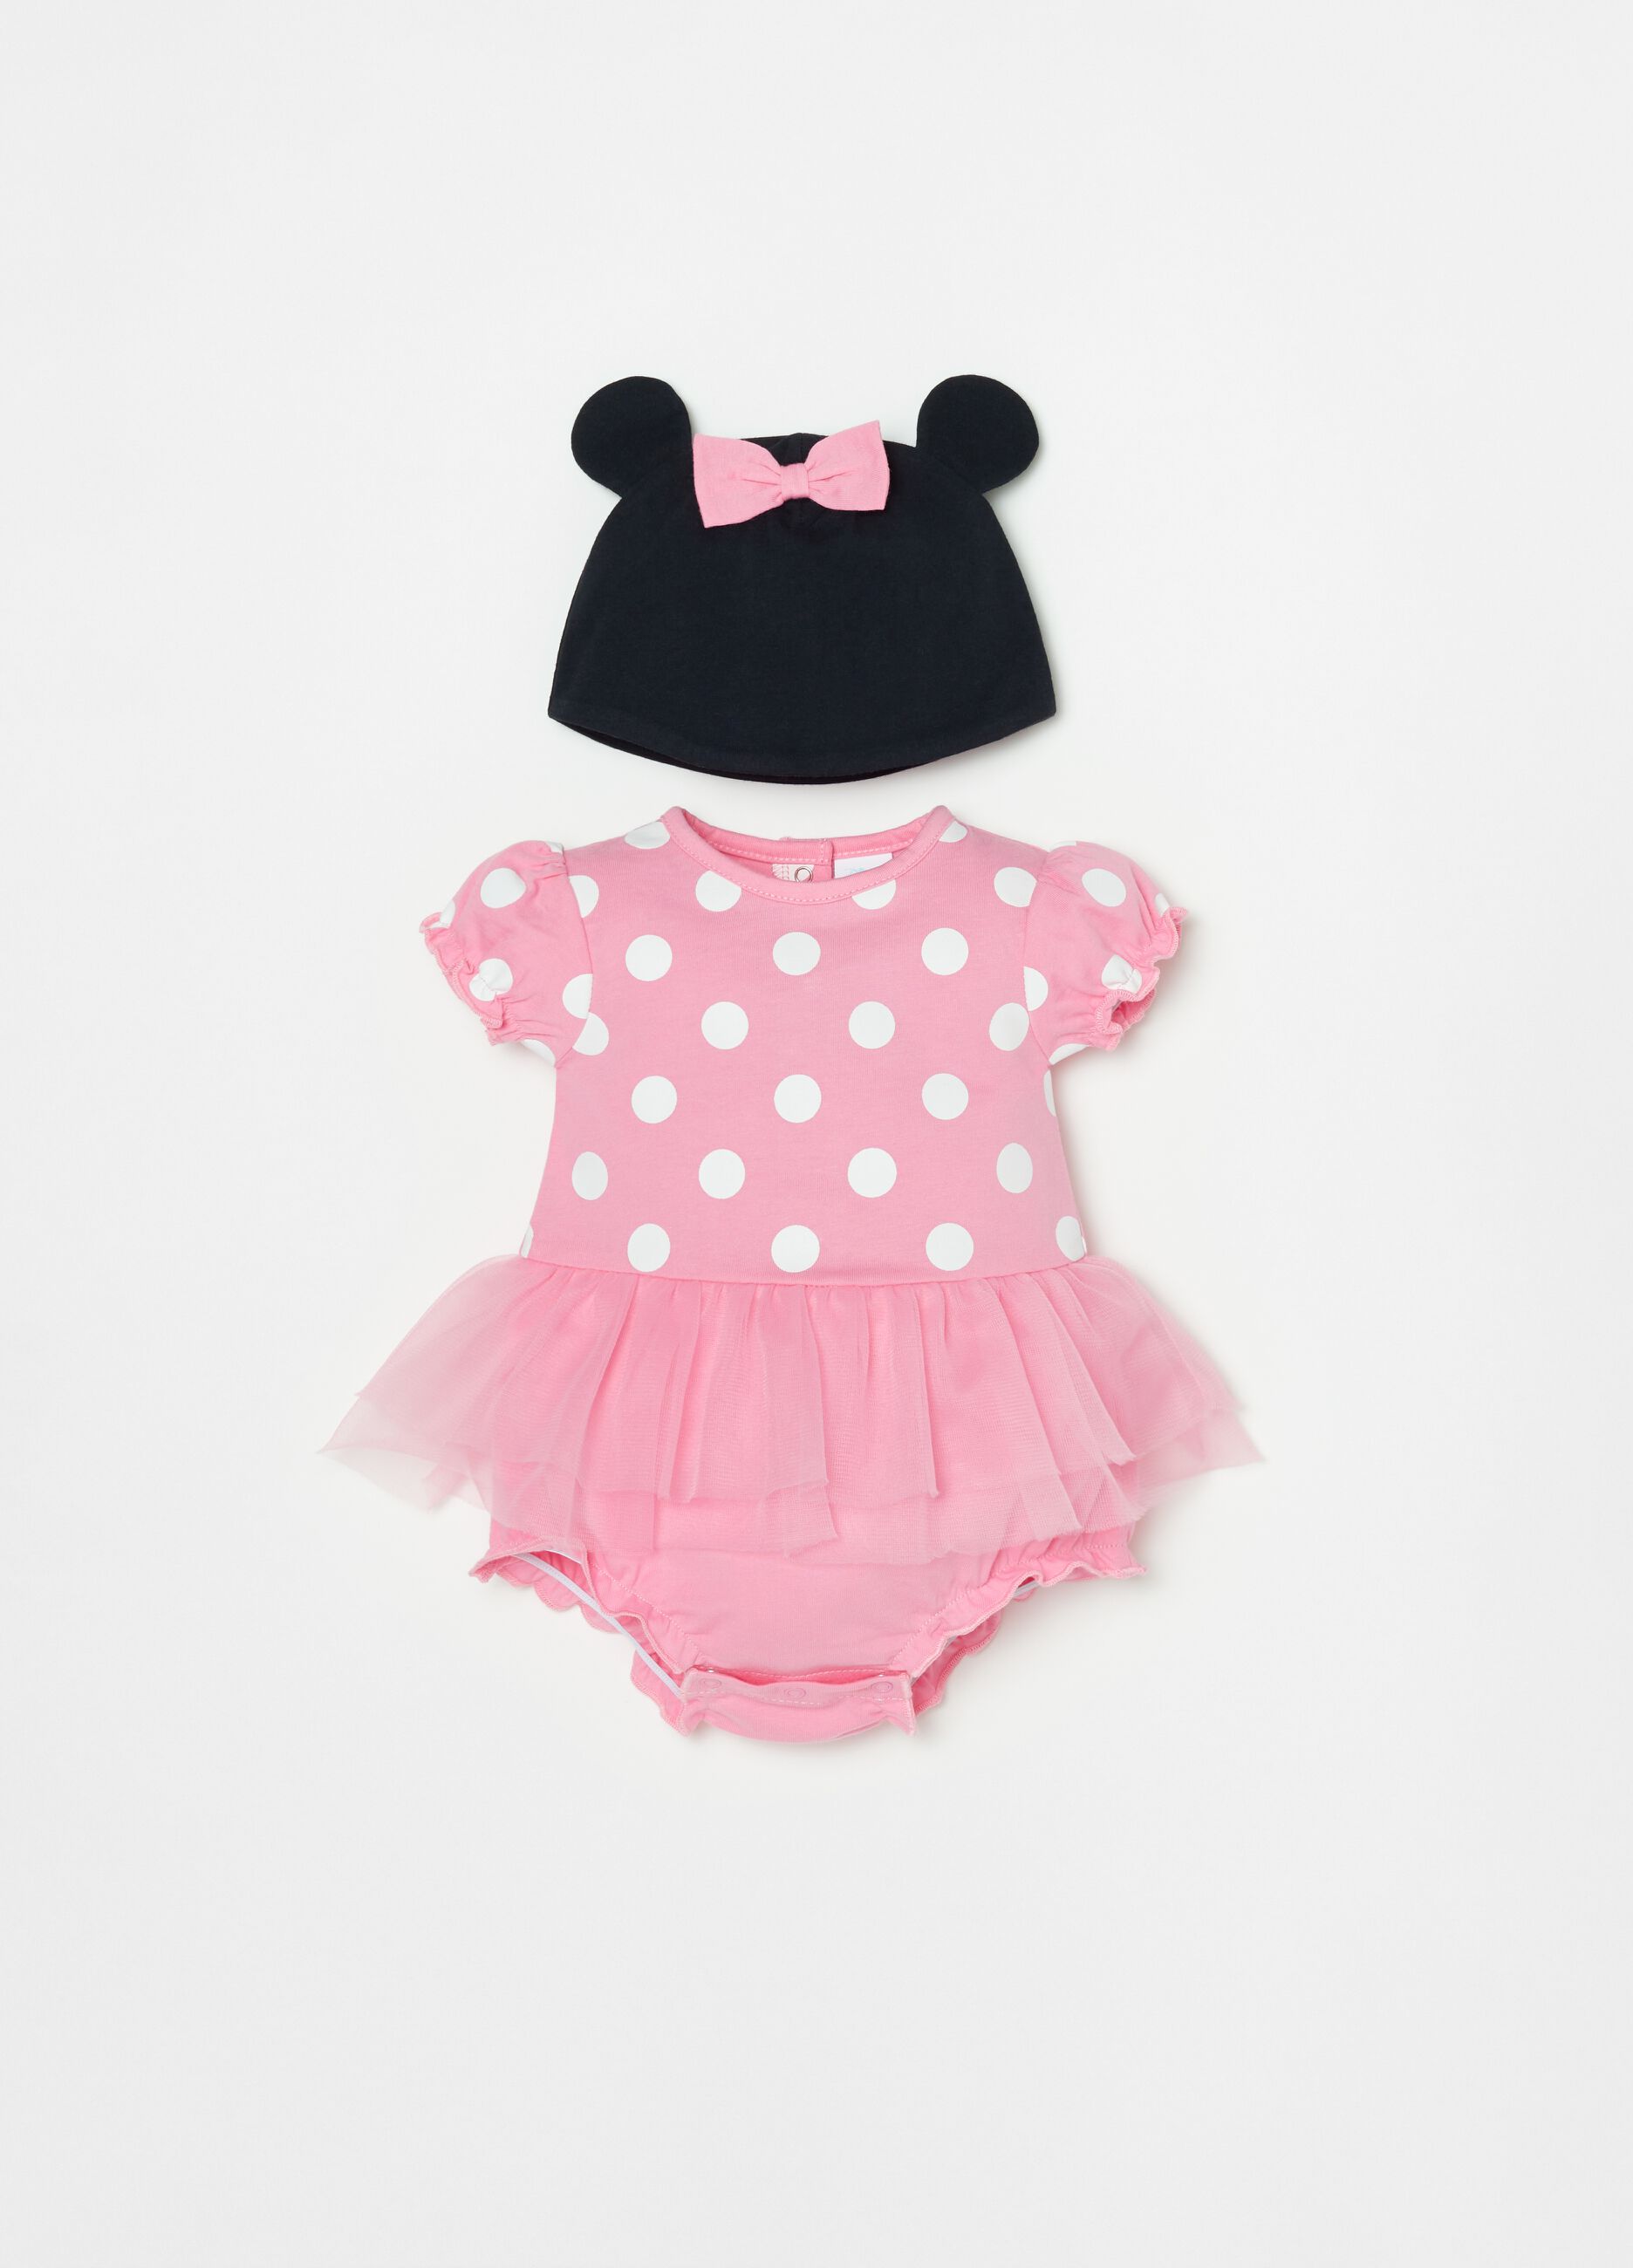 Disney Baby Minnie Mouse romper suit and hat set